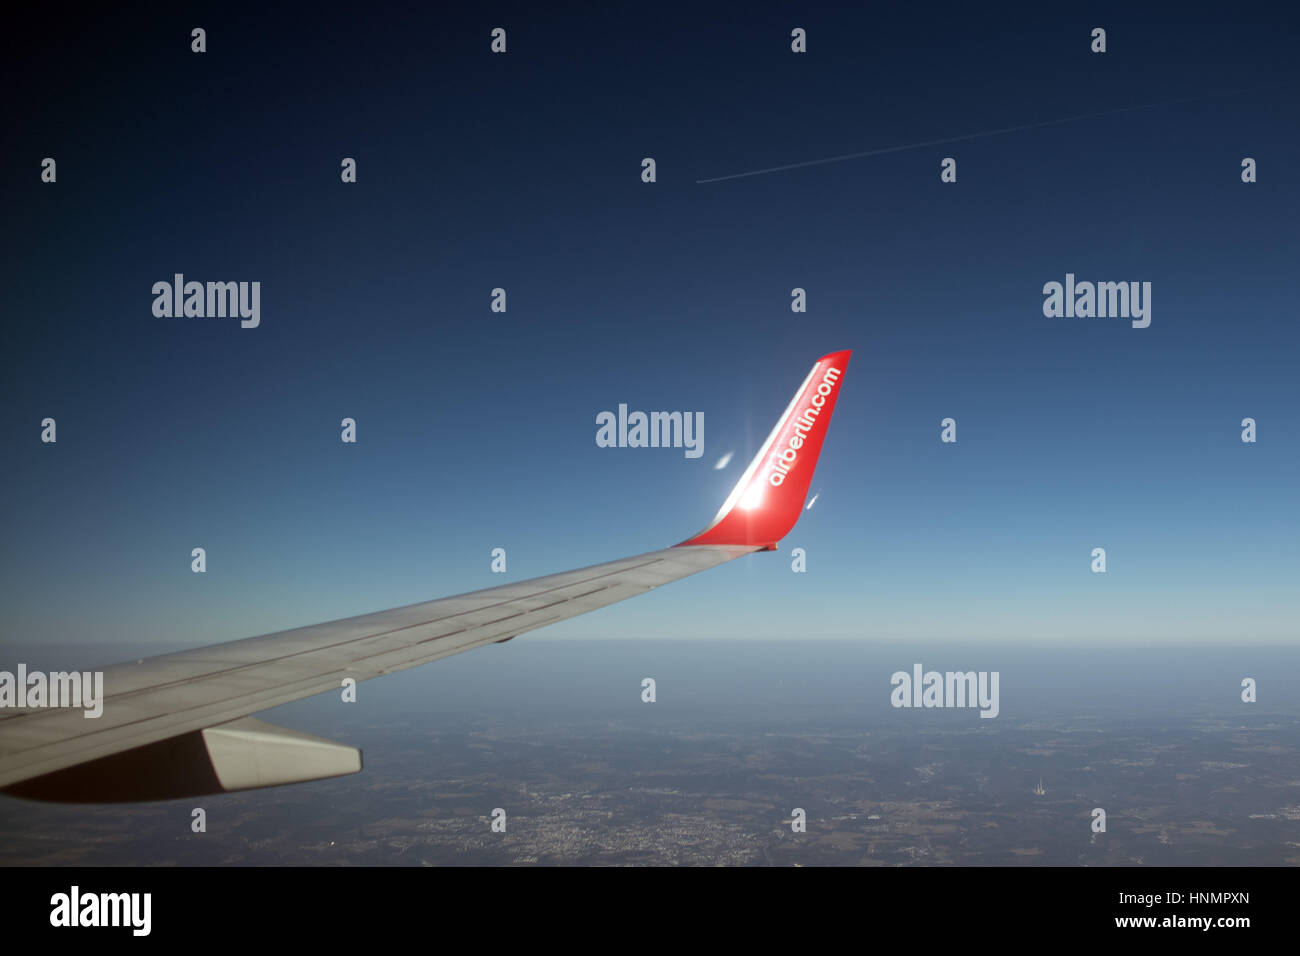 airberlin.com can be read on the winglet of a Boing 737-700 on its way between Berlin and Cologne, Germany, 14 February 2017. Photo: Federico Gambarini/dpa Stock Photo